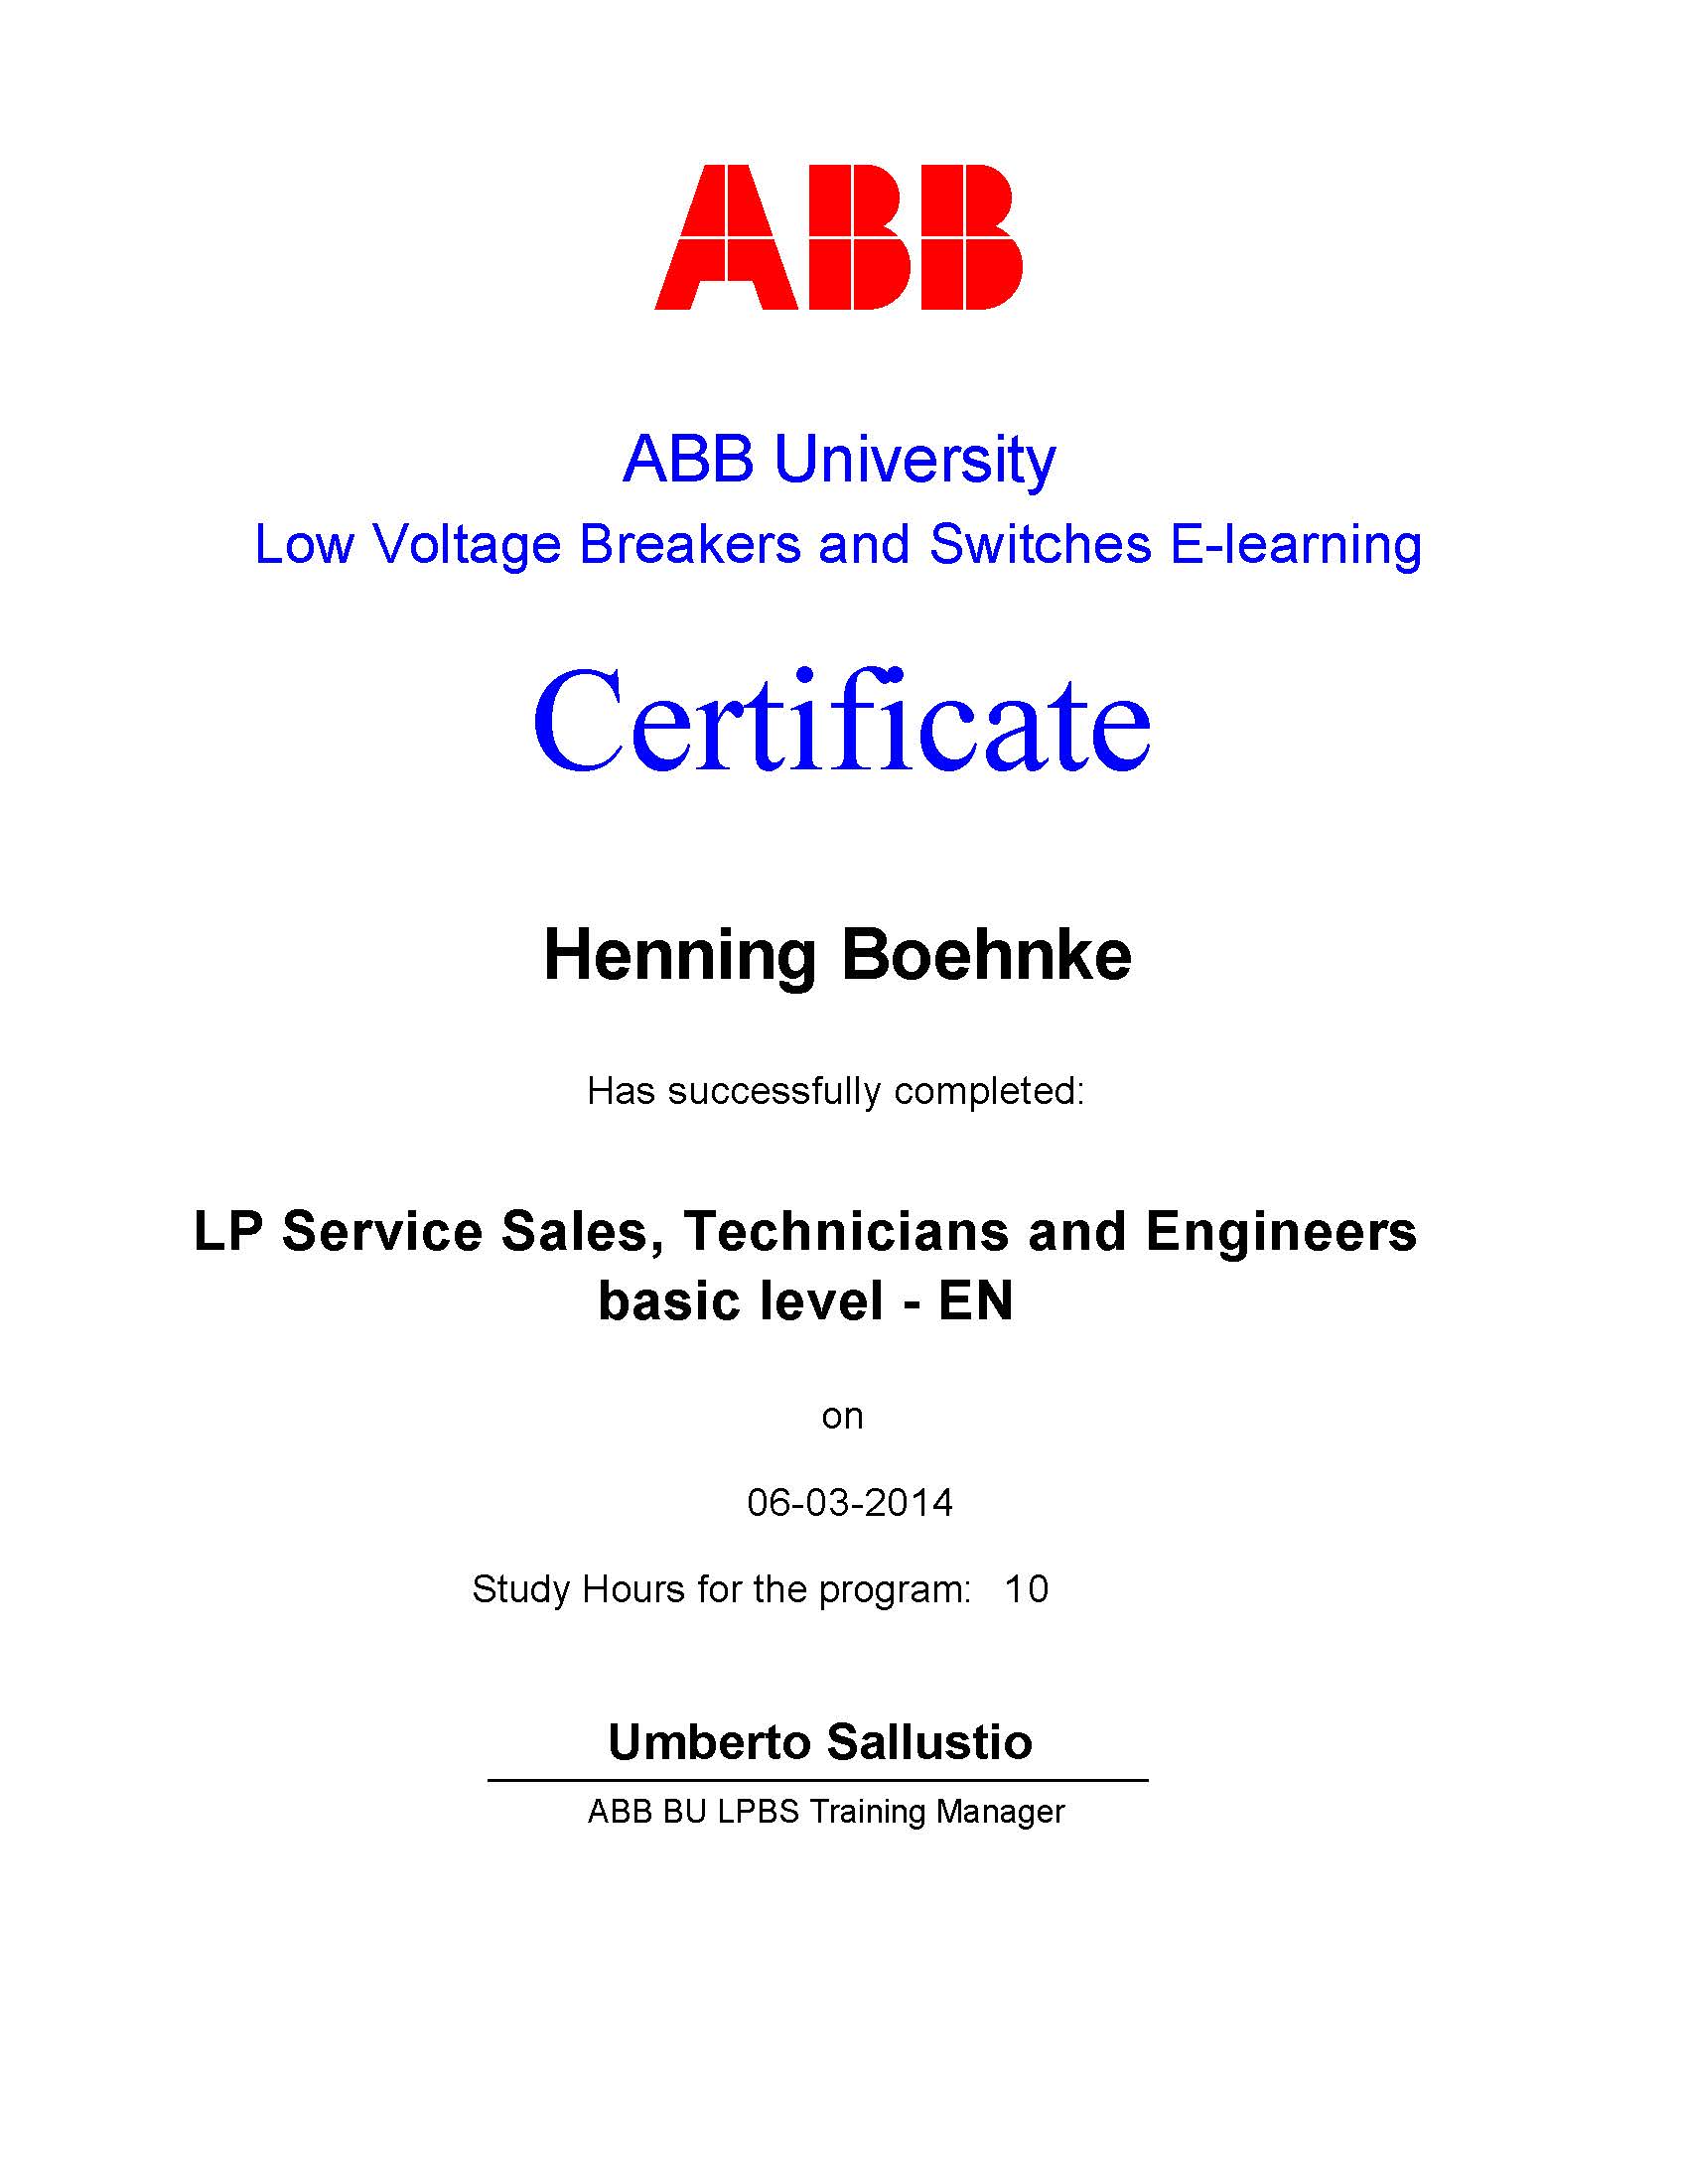 LP Service Sales, Technicians and Engineers Basic Level